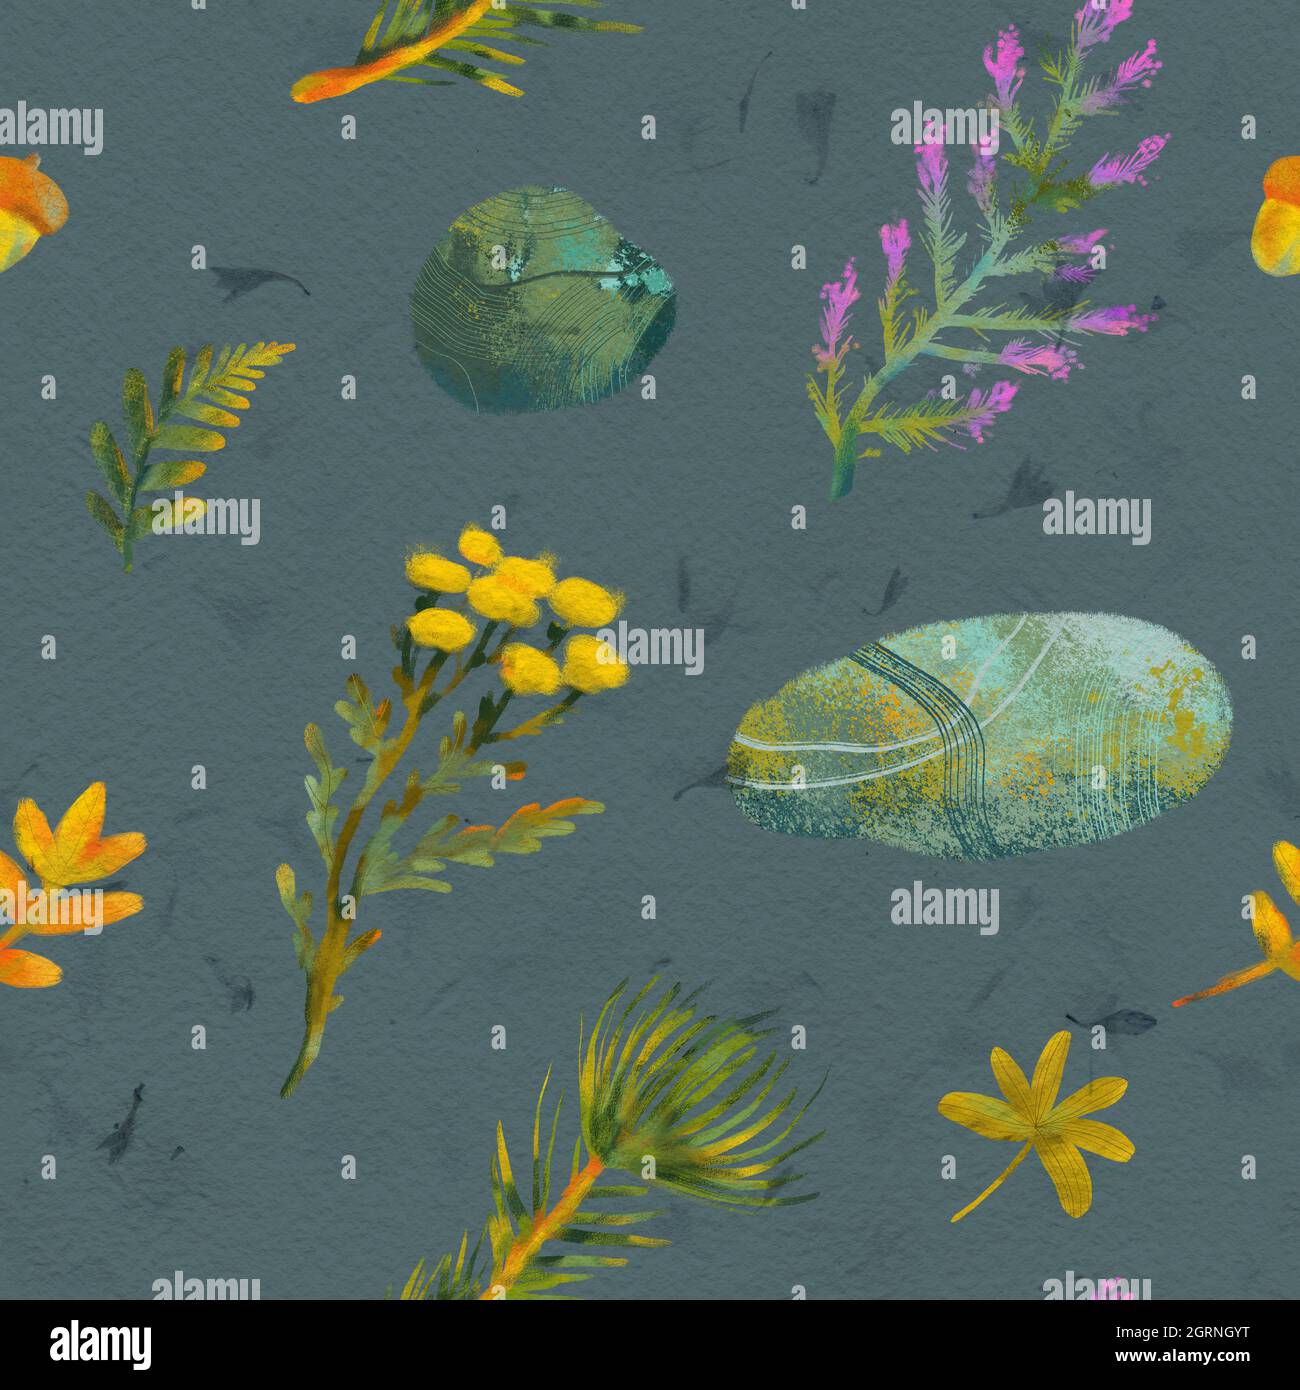 Seamless pattern with elements drawn by hand with plants. Stock Photo